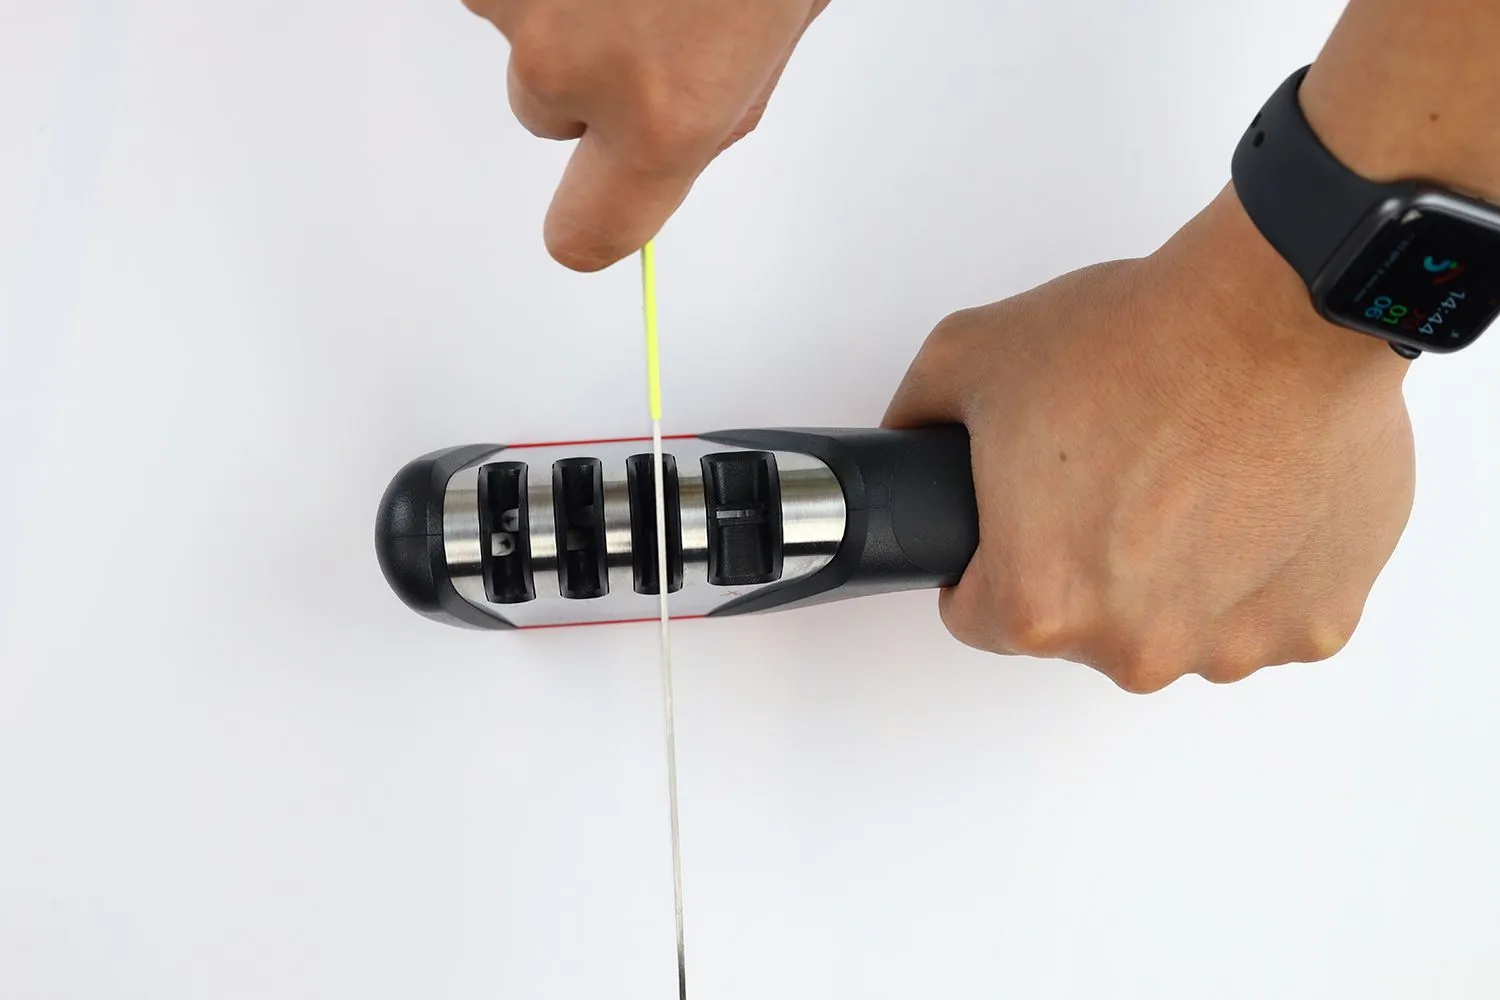 Get Your Knives Out and Sharpen Them for 34% Off With the Longzon 4-in-1  Knife Sharpener